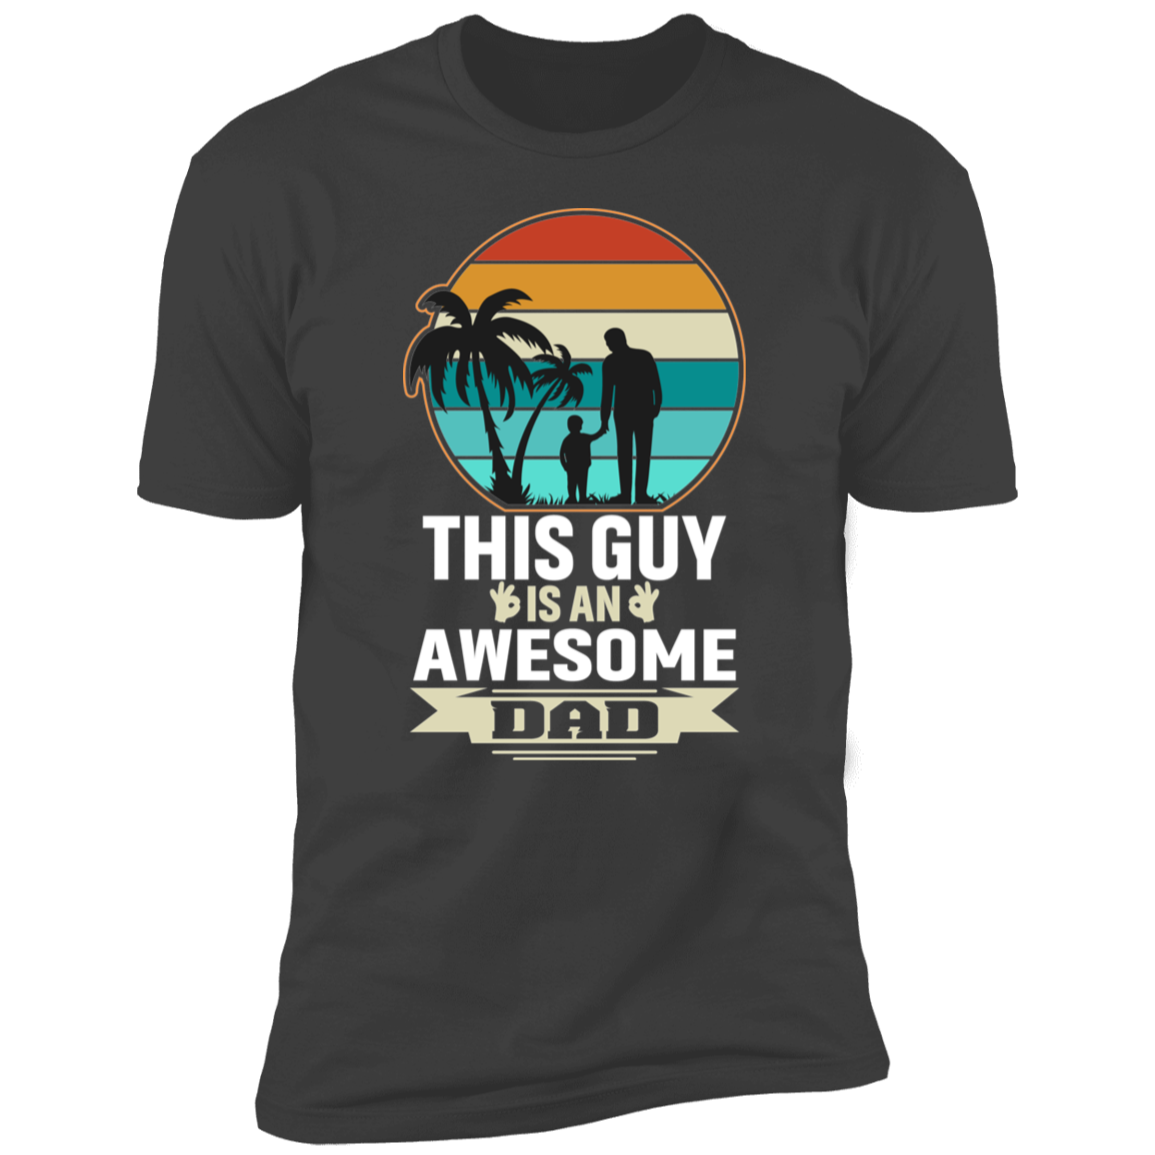 This Guy Is An Awesome Dad Premium Short Sleeve T-Shirt